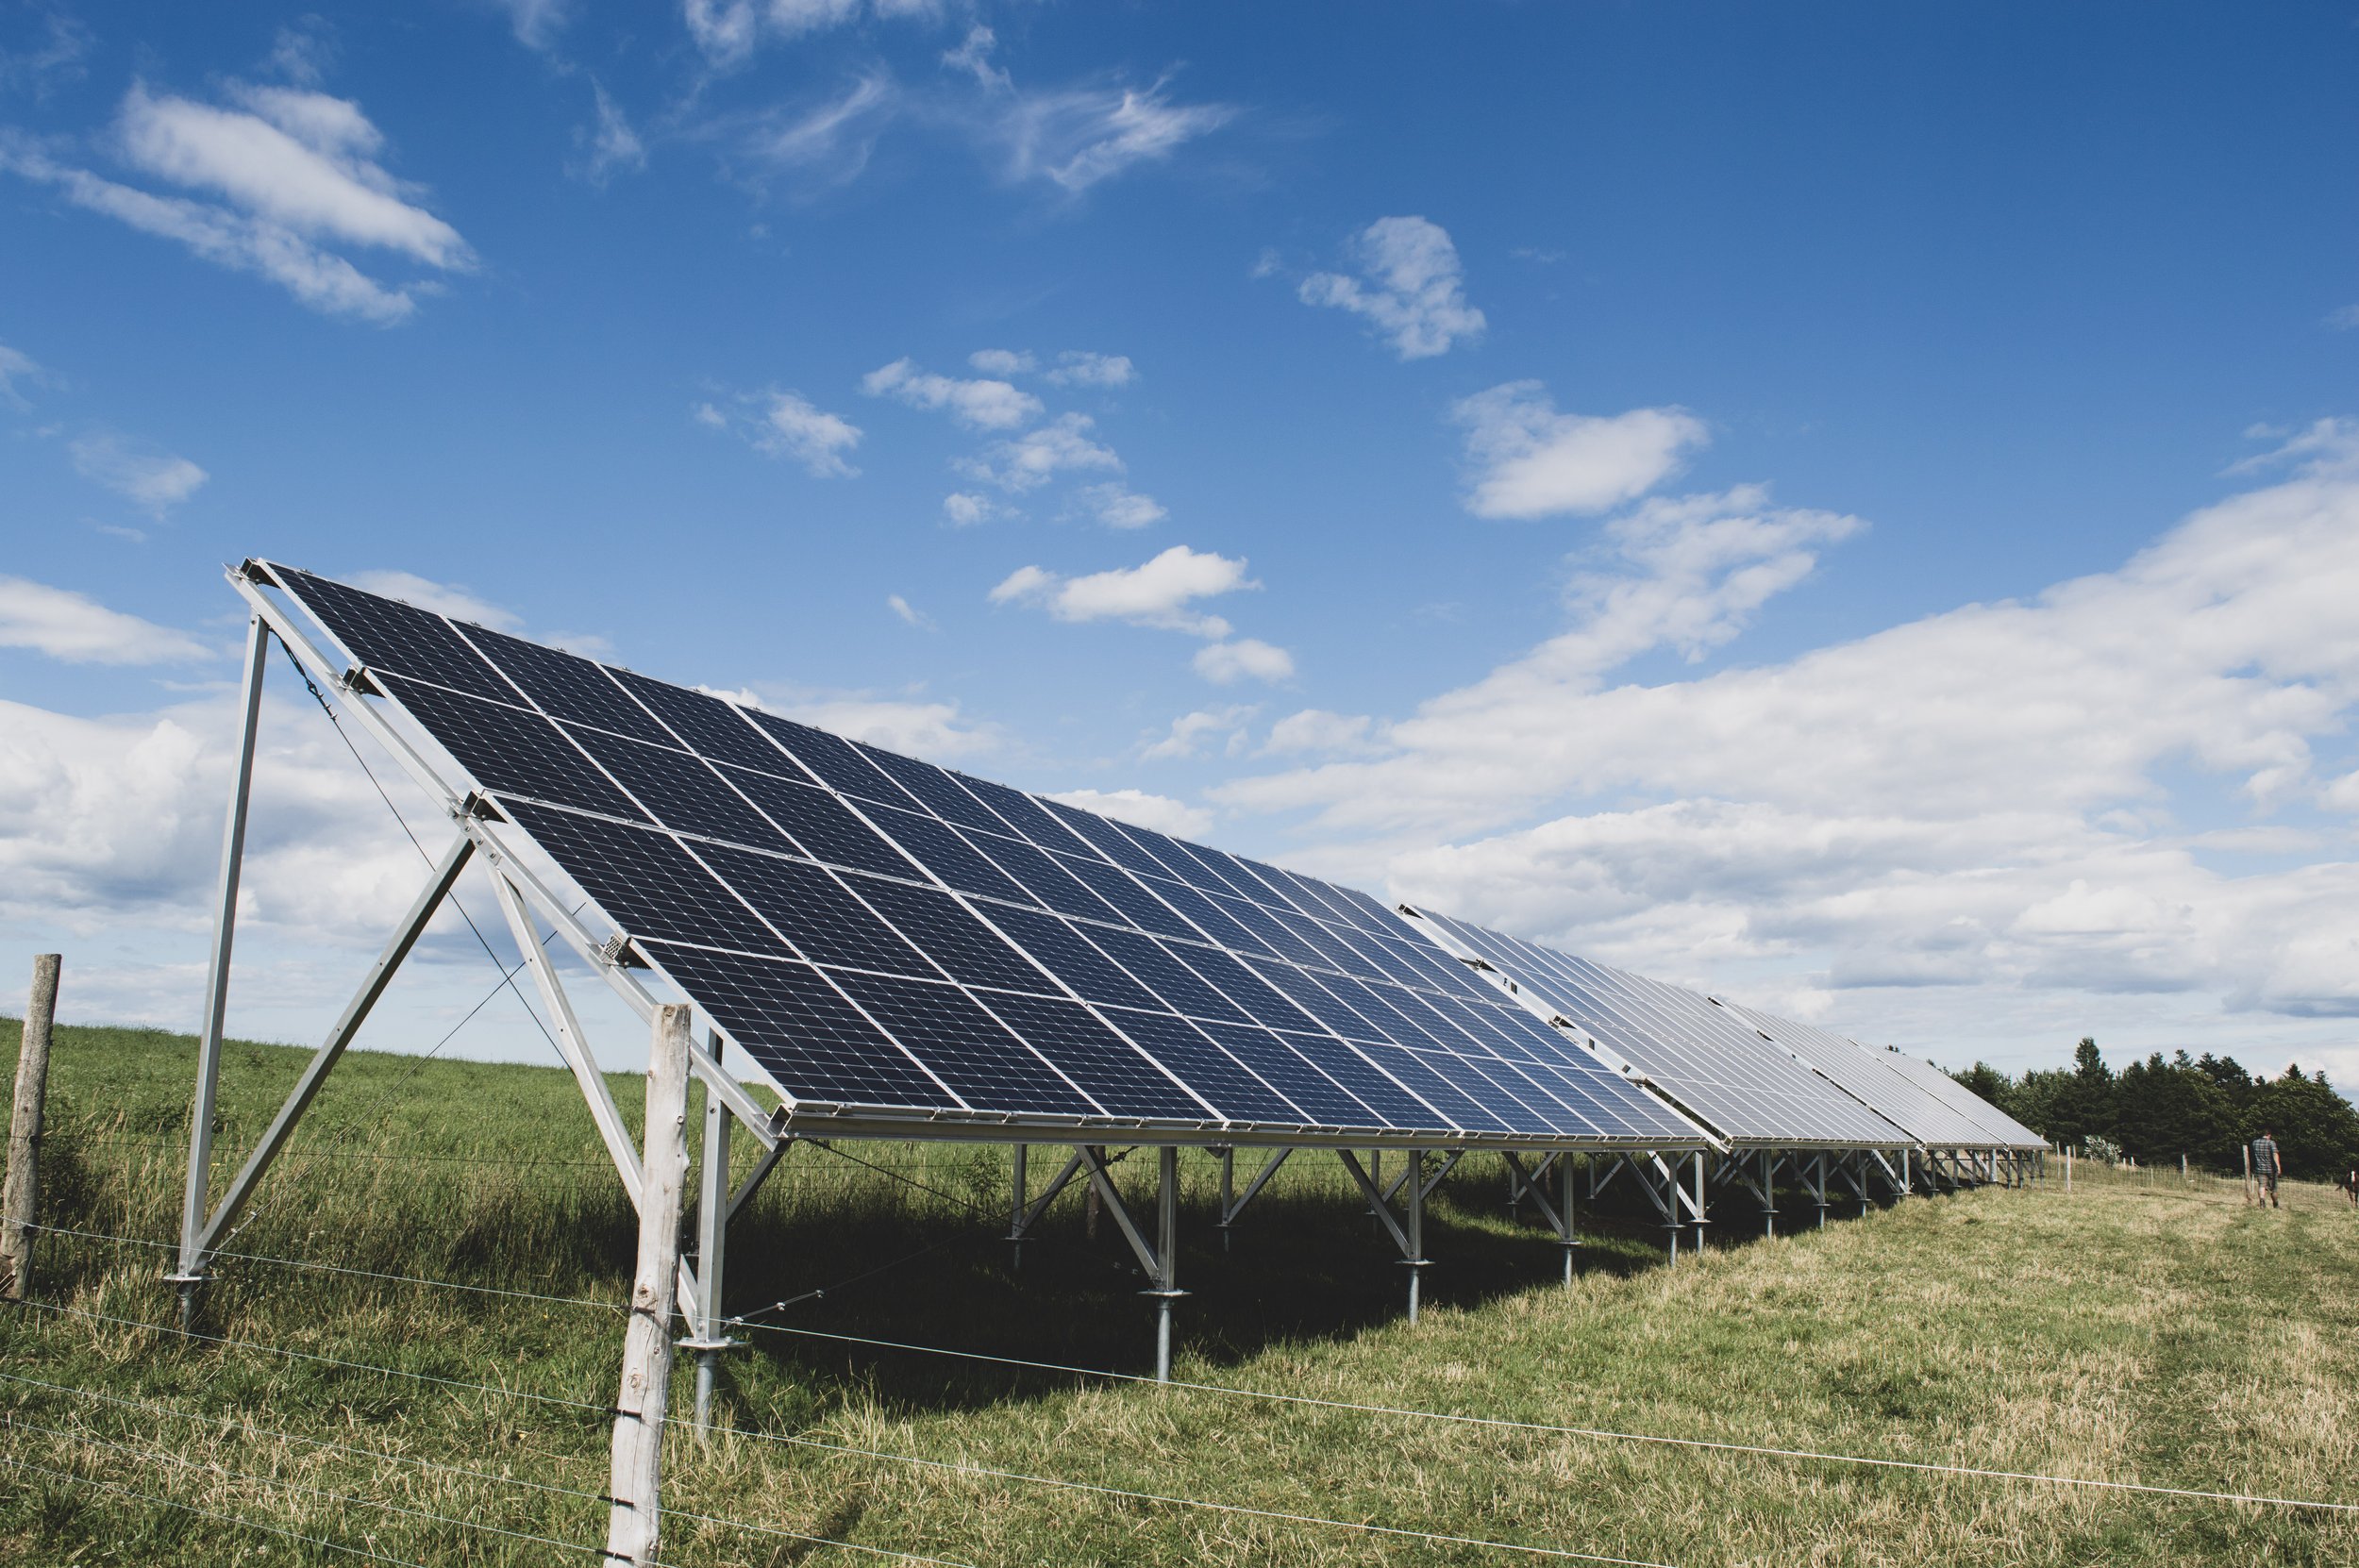 commercial-solar-rebates-doubled-effective-august-30-2022-the-smart